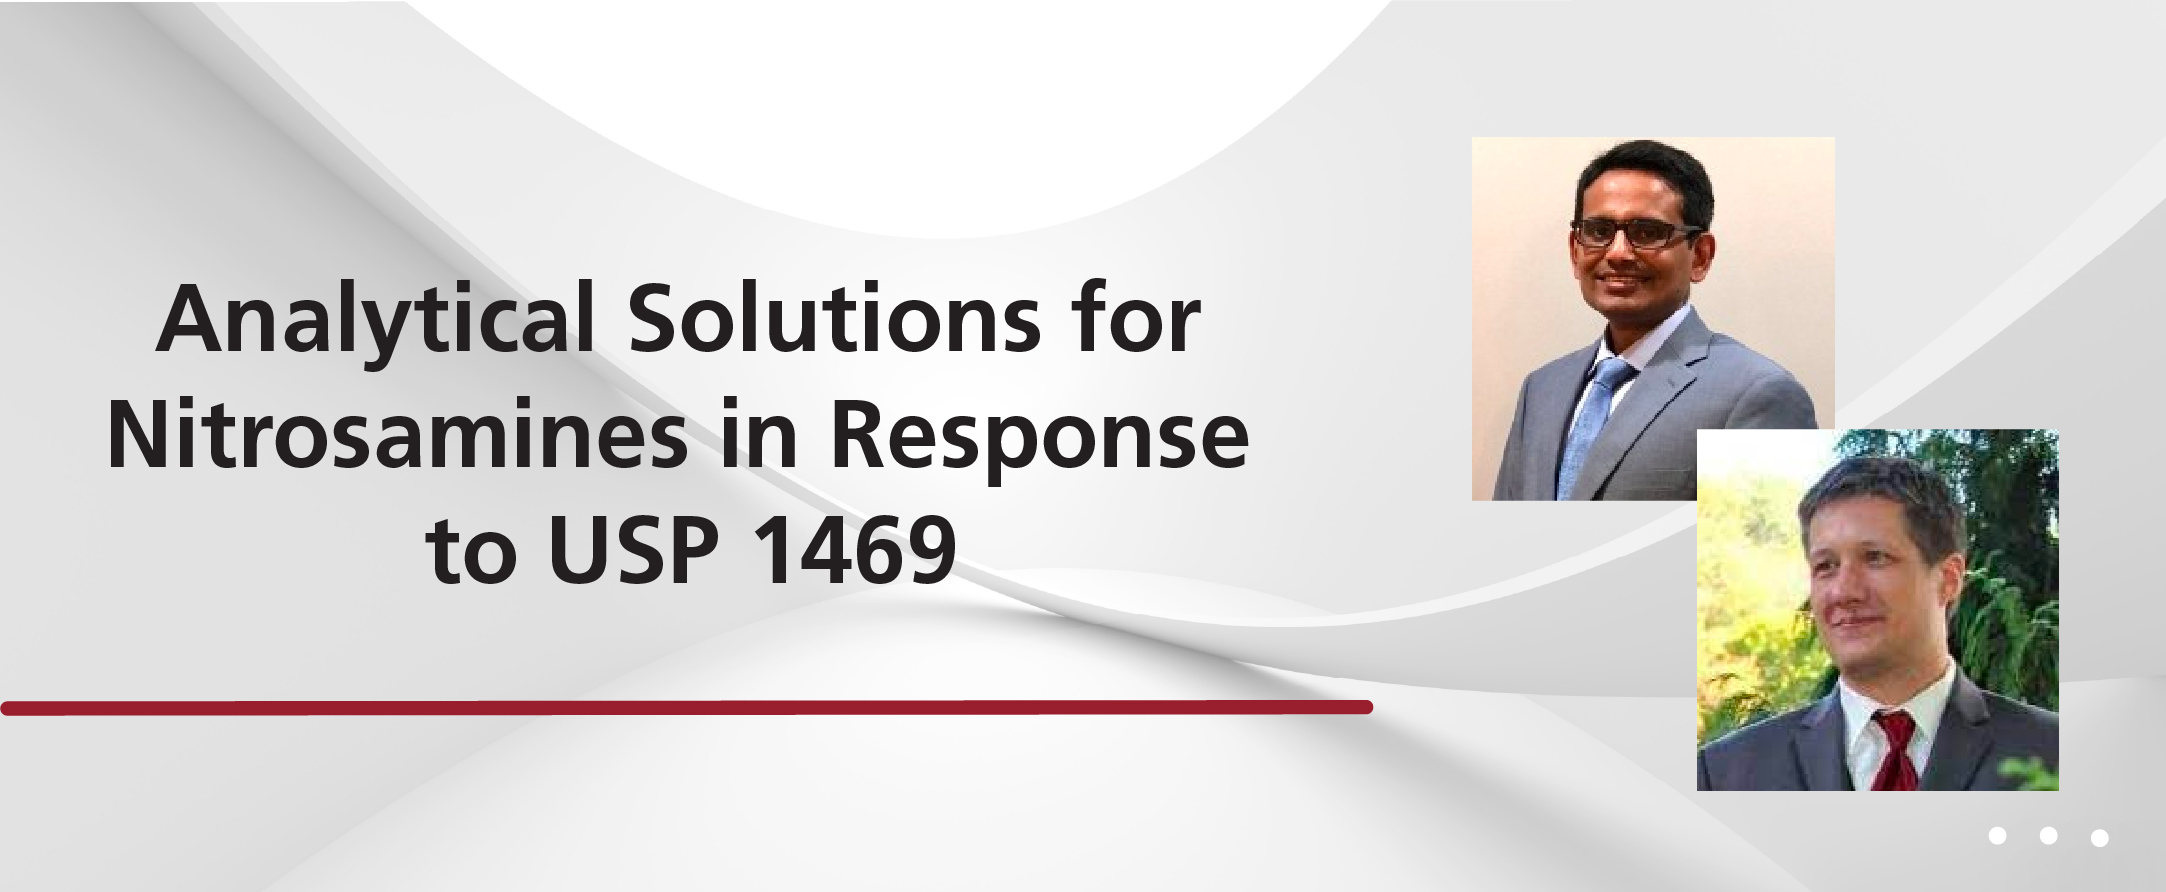 Analytical Solutions for Nitrosamines in Response to USP 1469